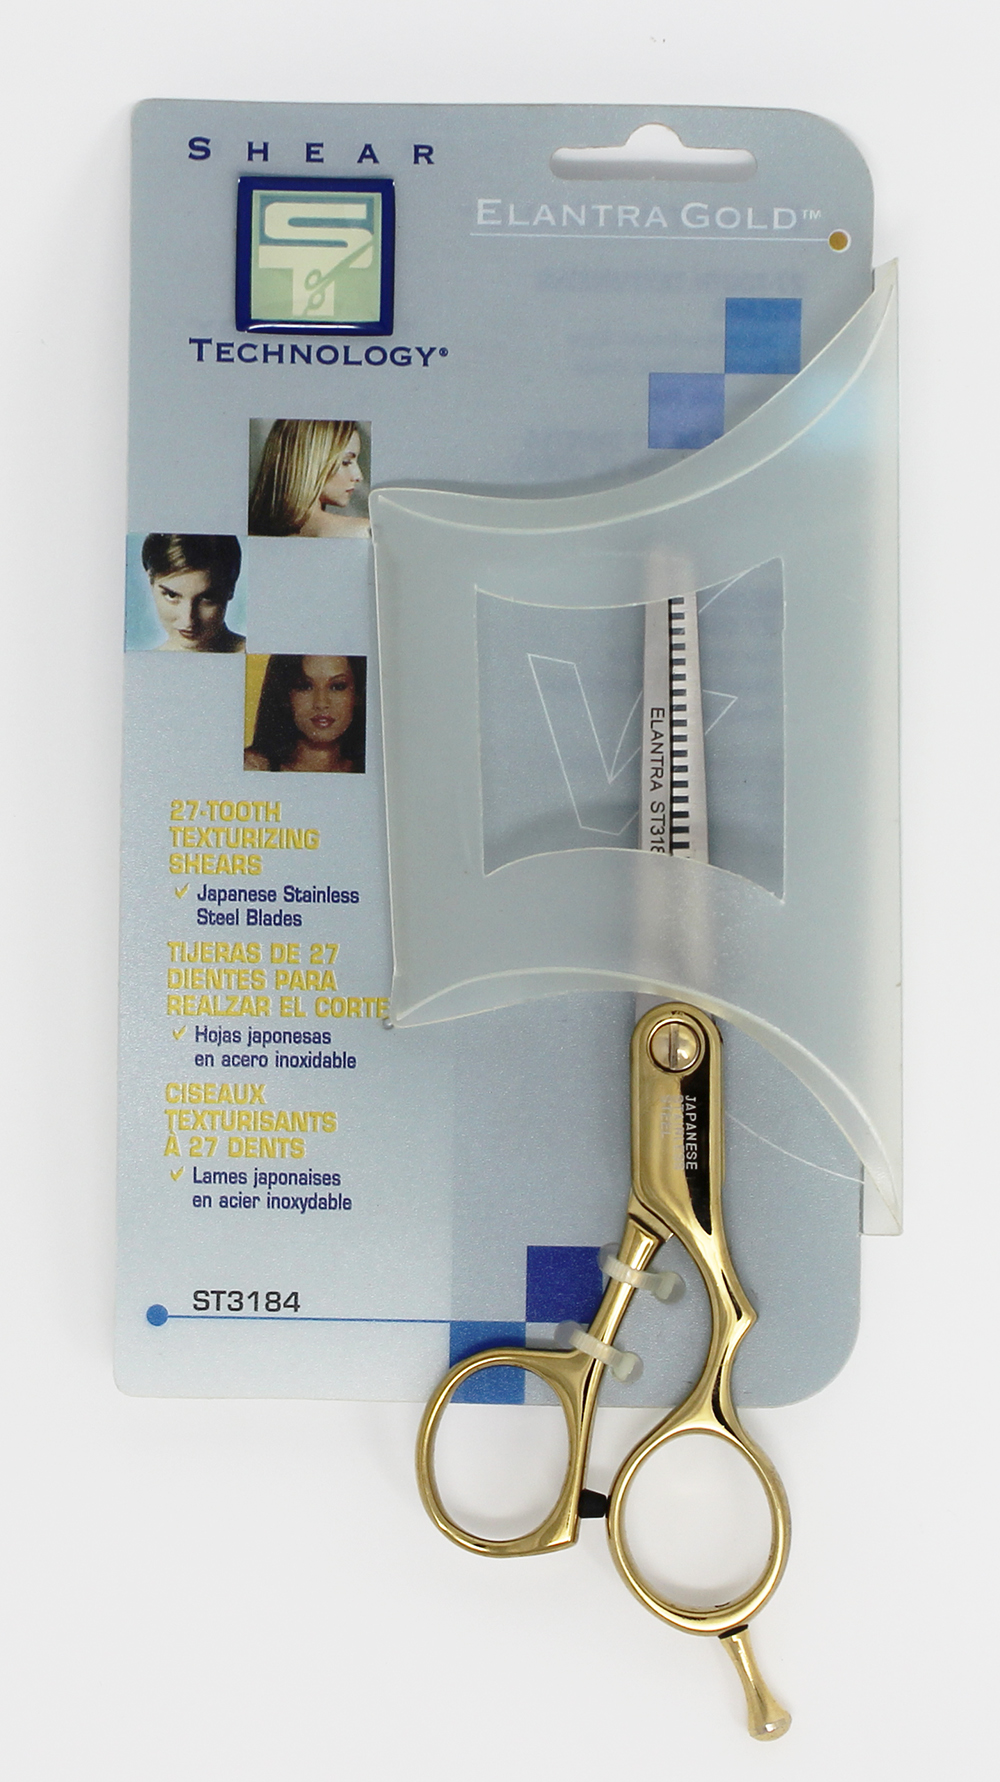 Elantra Gold 27-Tooth Texturizing Shears - Click Image to Close